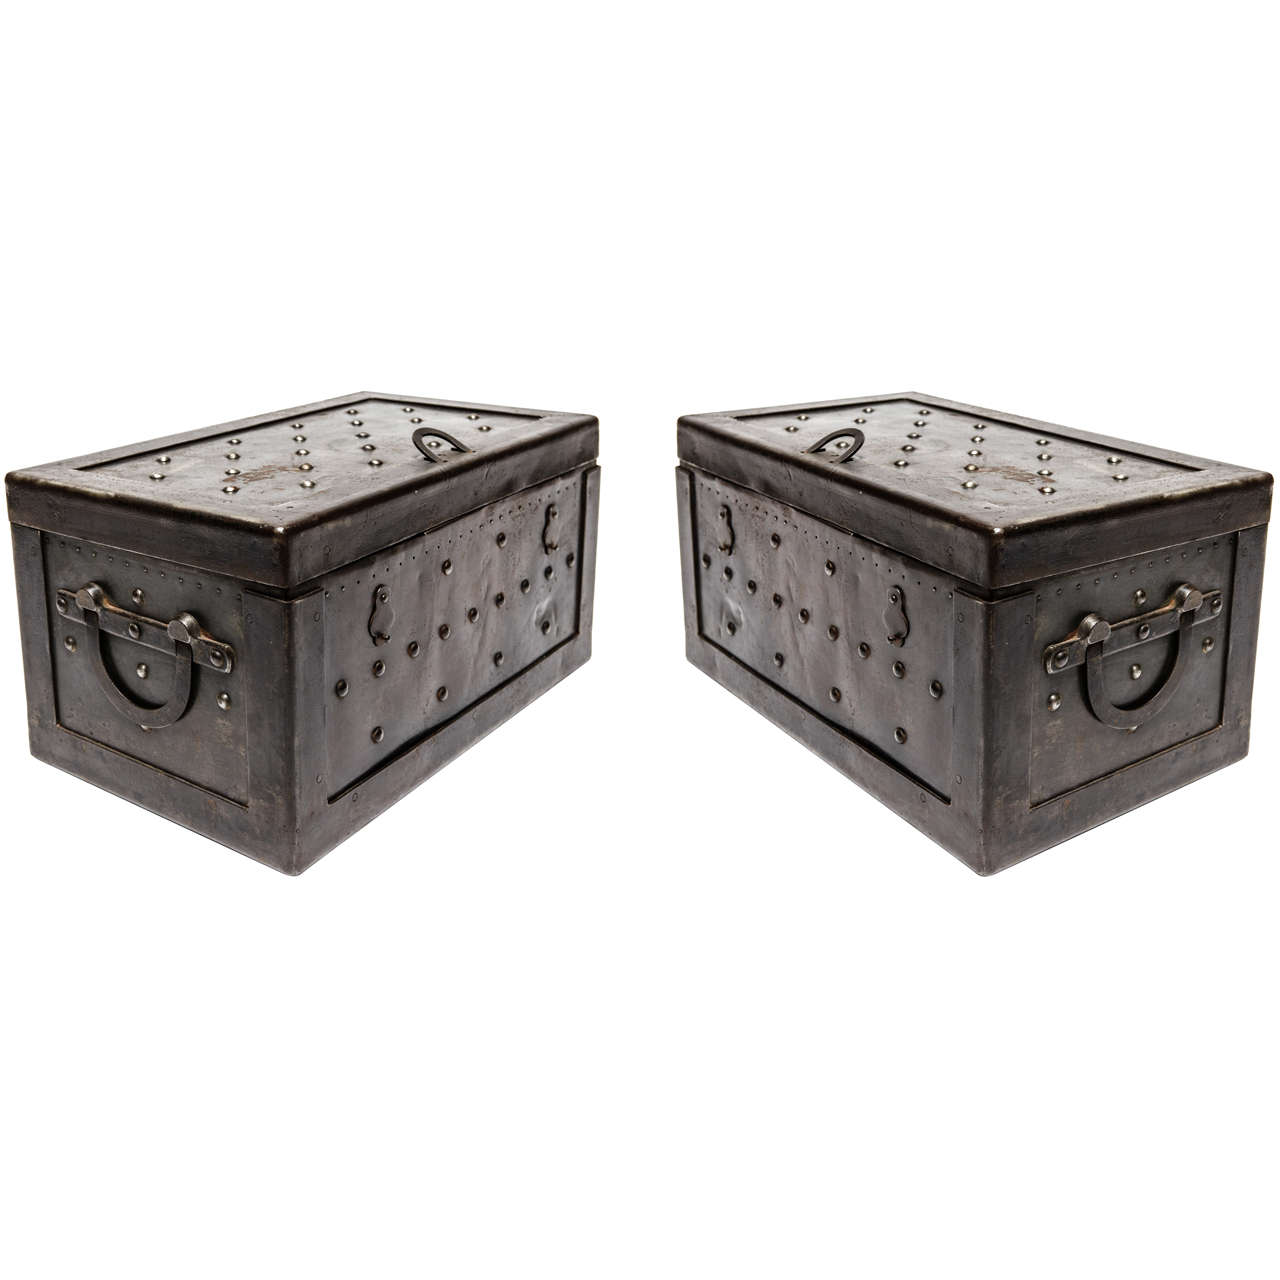 Rare Pair Of Italian Iron Strong Boxes. For Sale